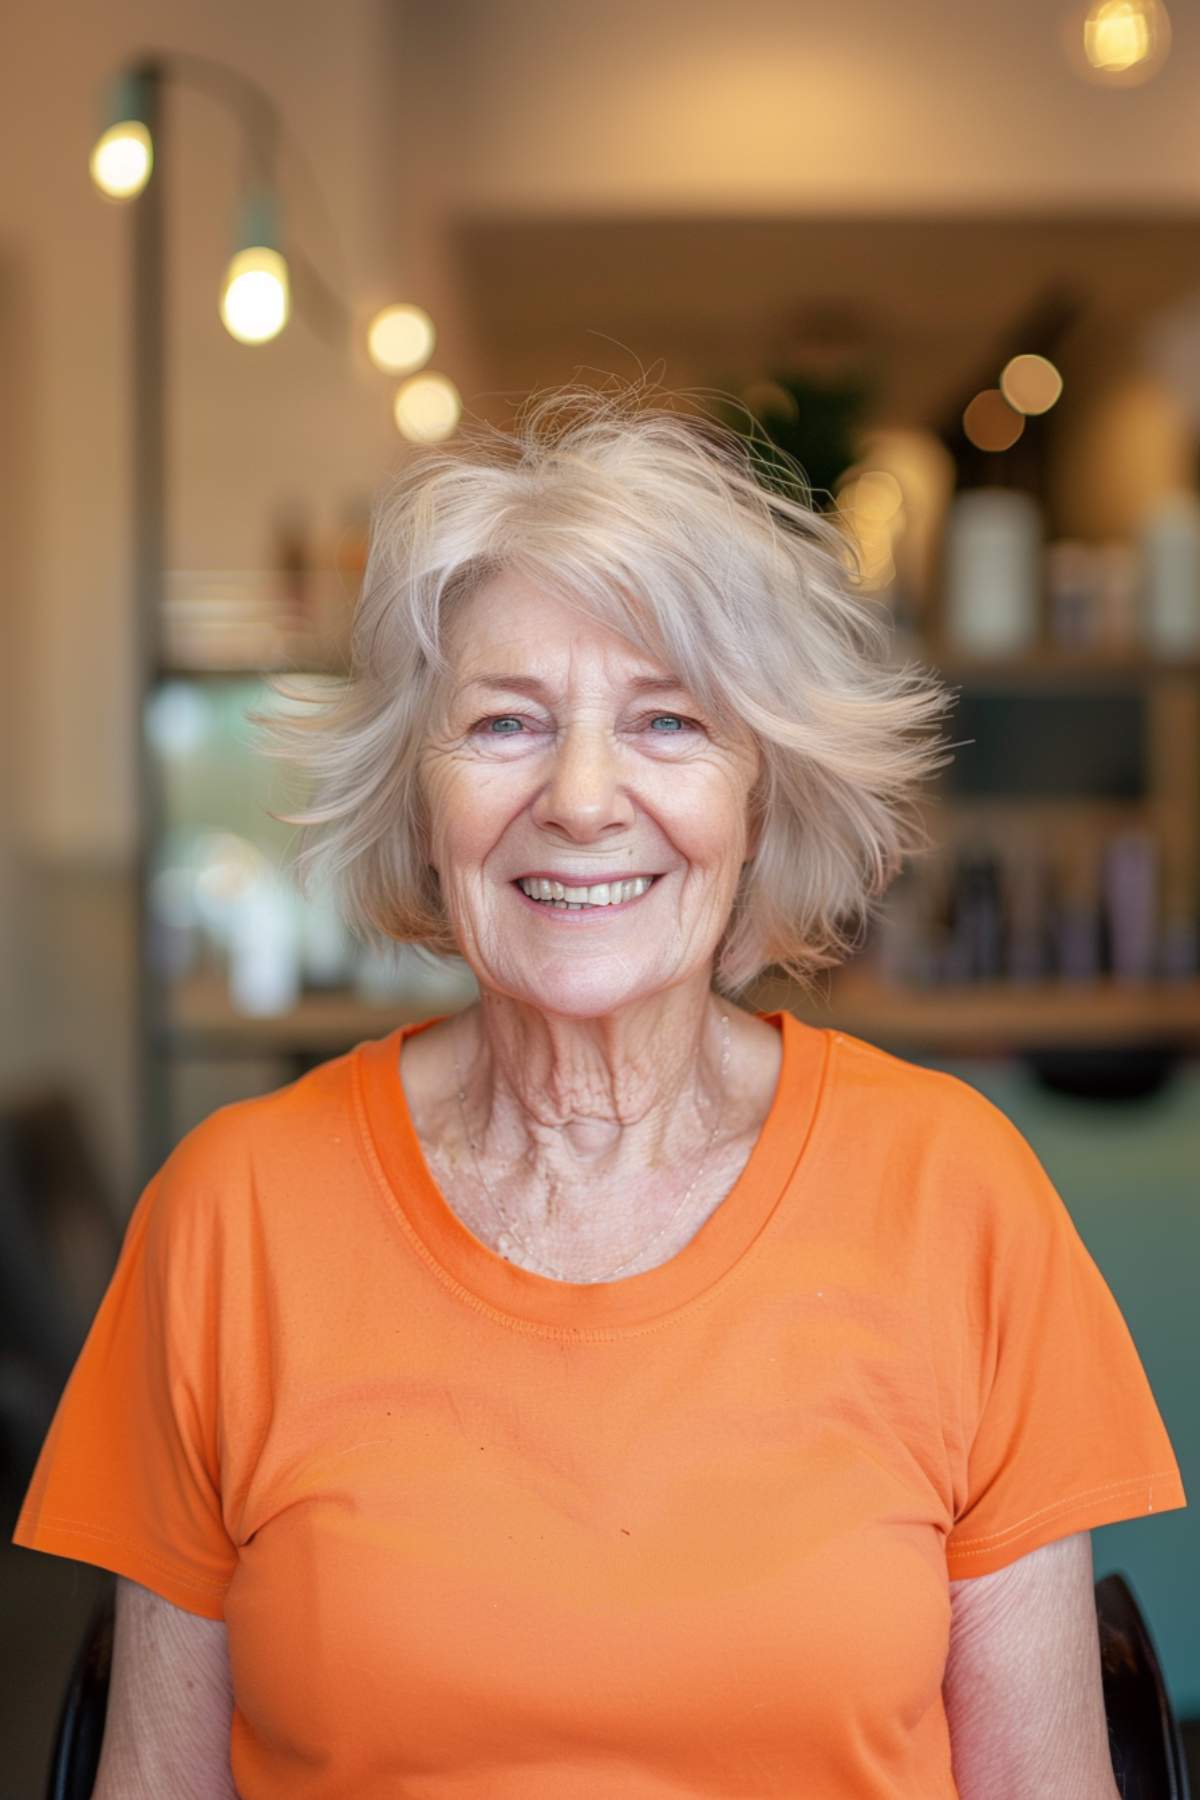 Choppy layered haircut for women over 70 with fine to medium hair